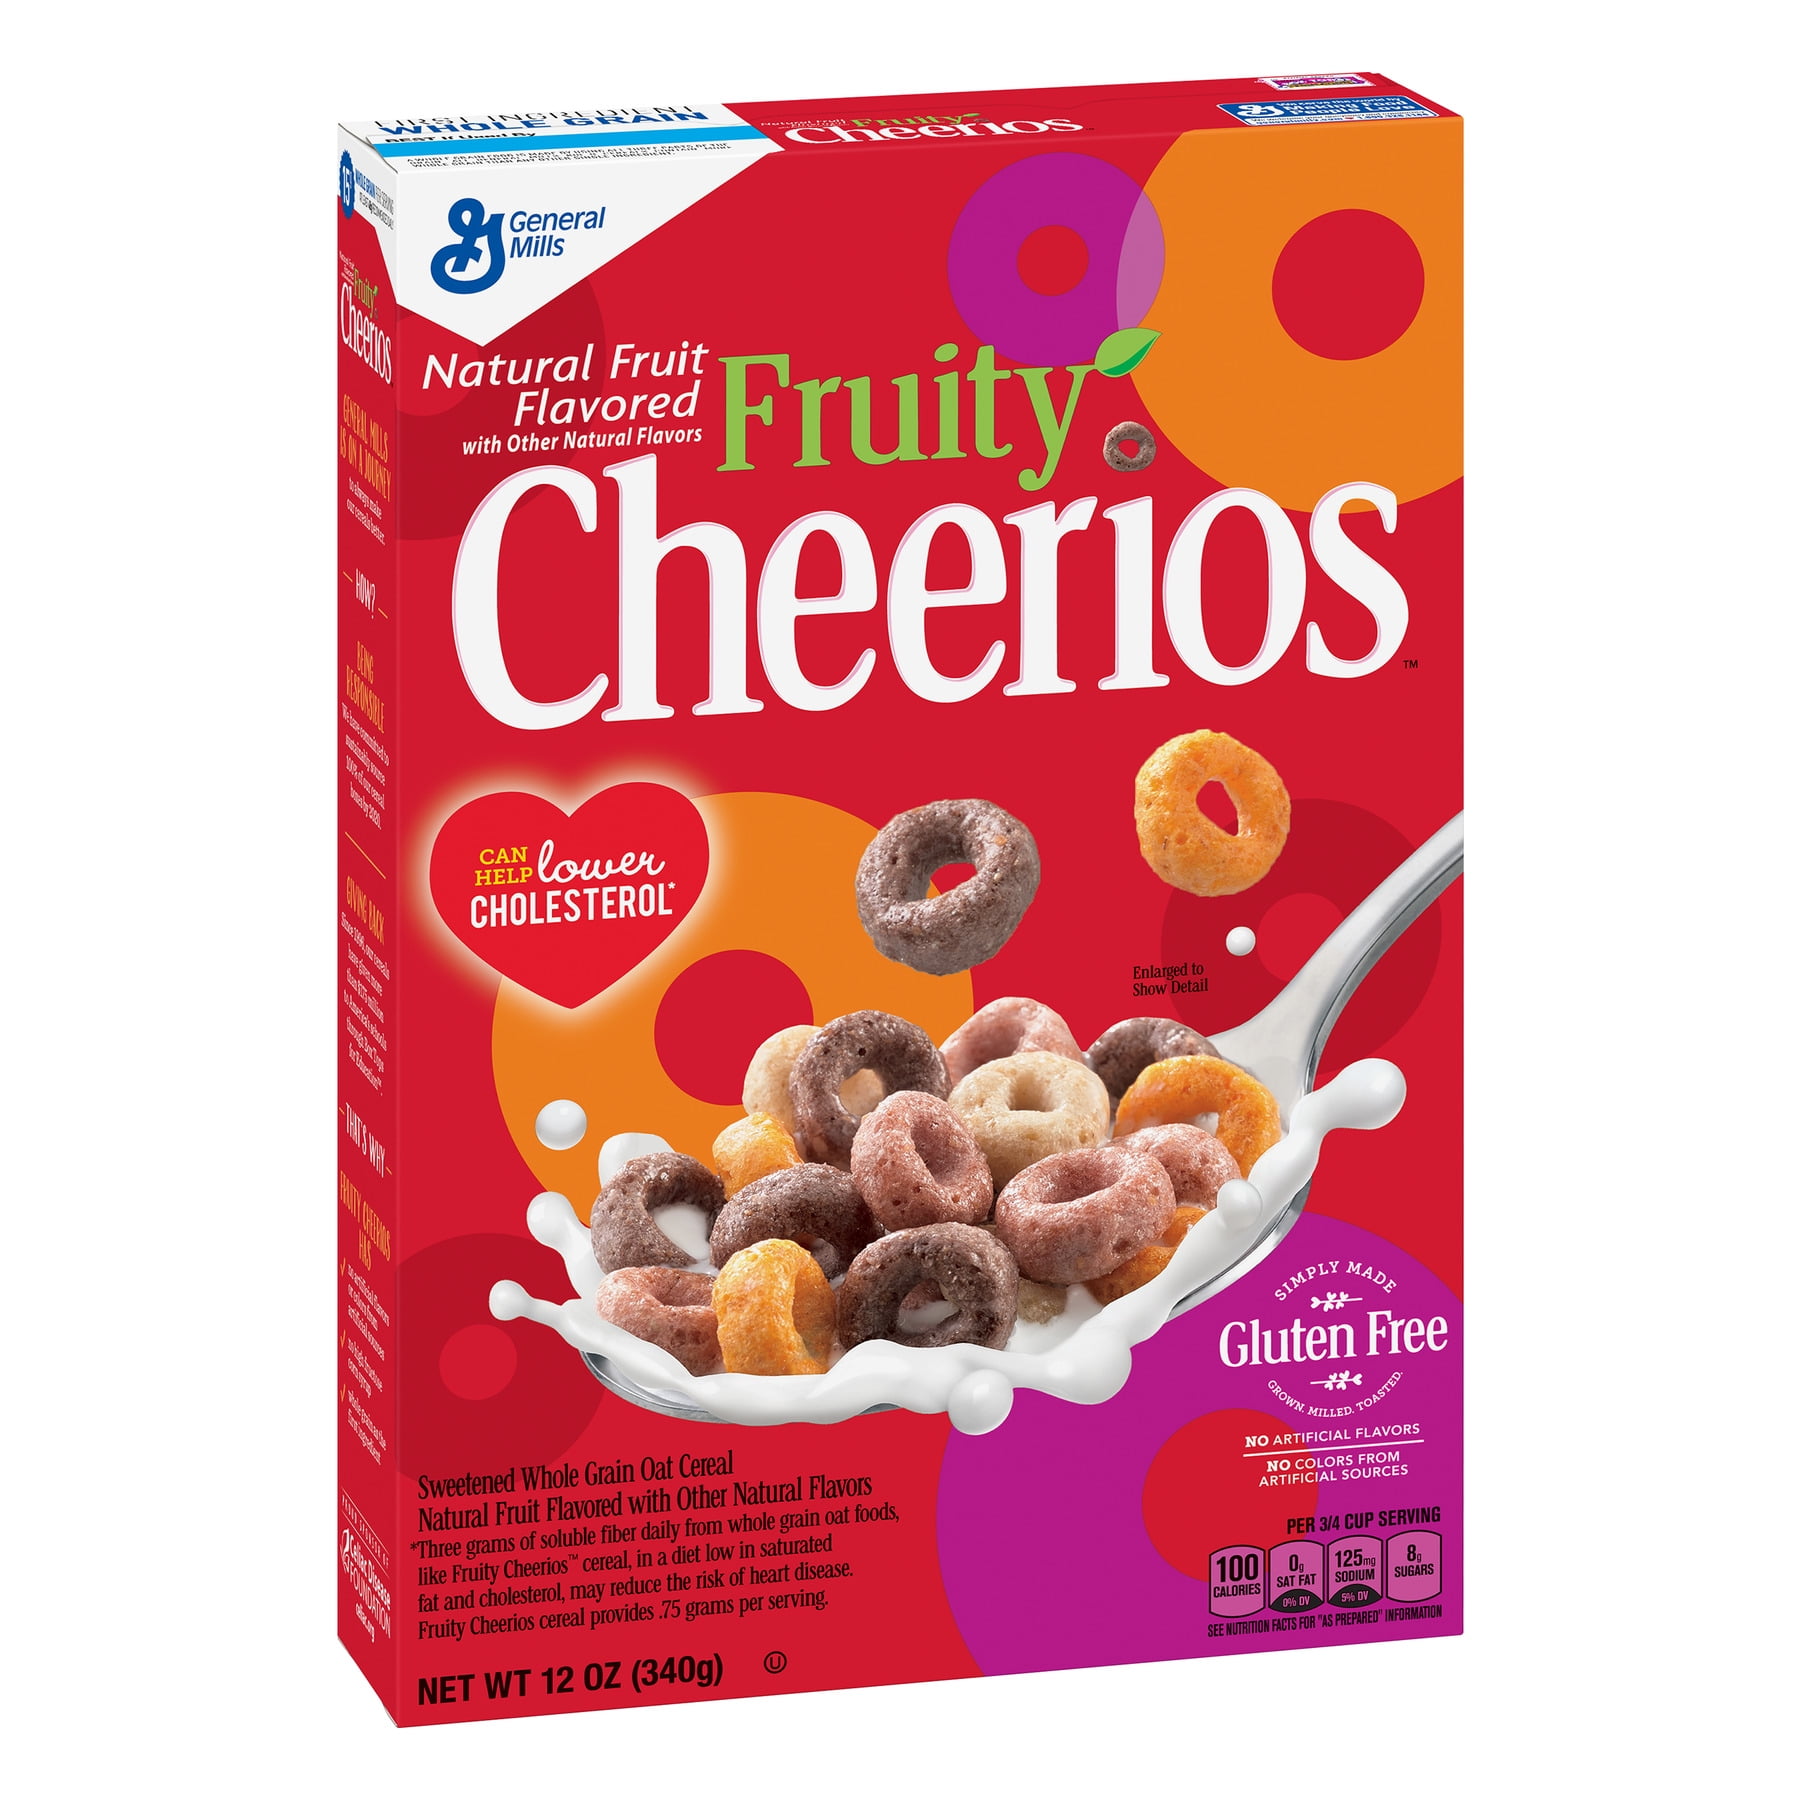 What Cereals Have Been Discontinued